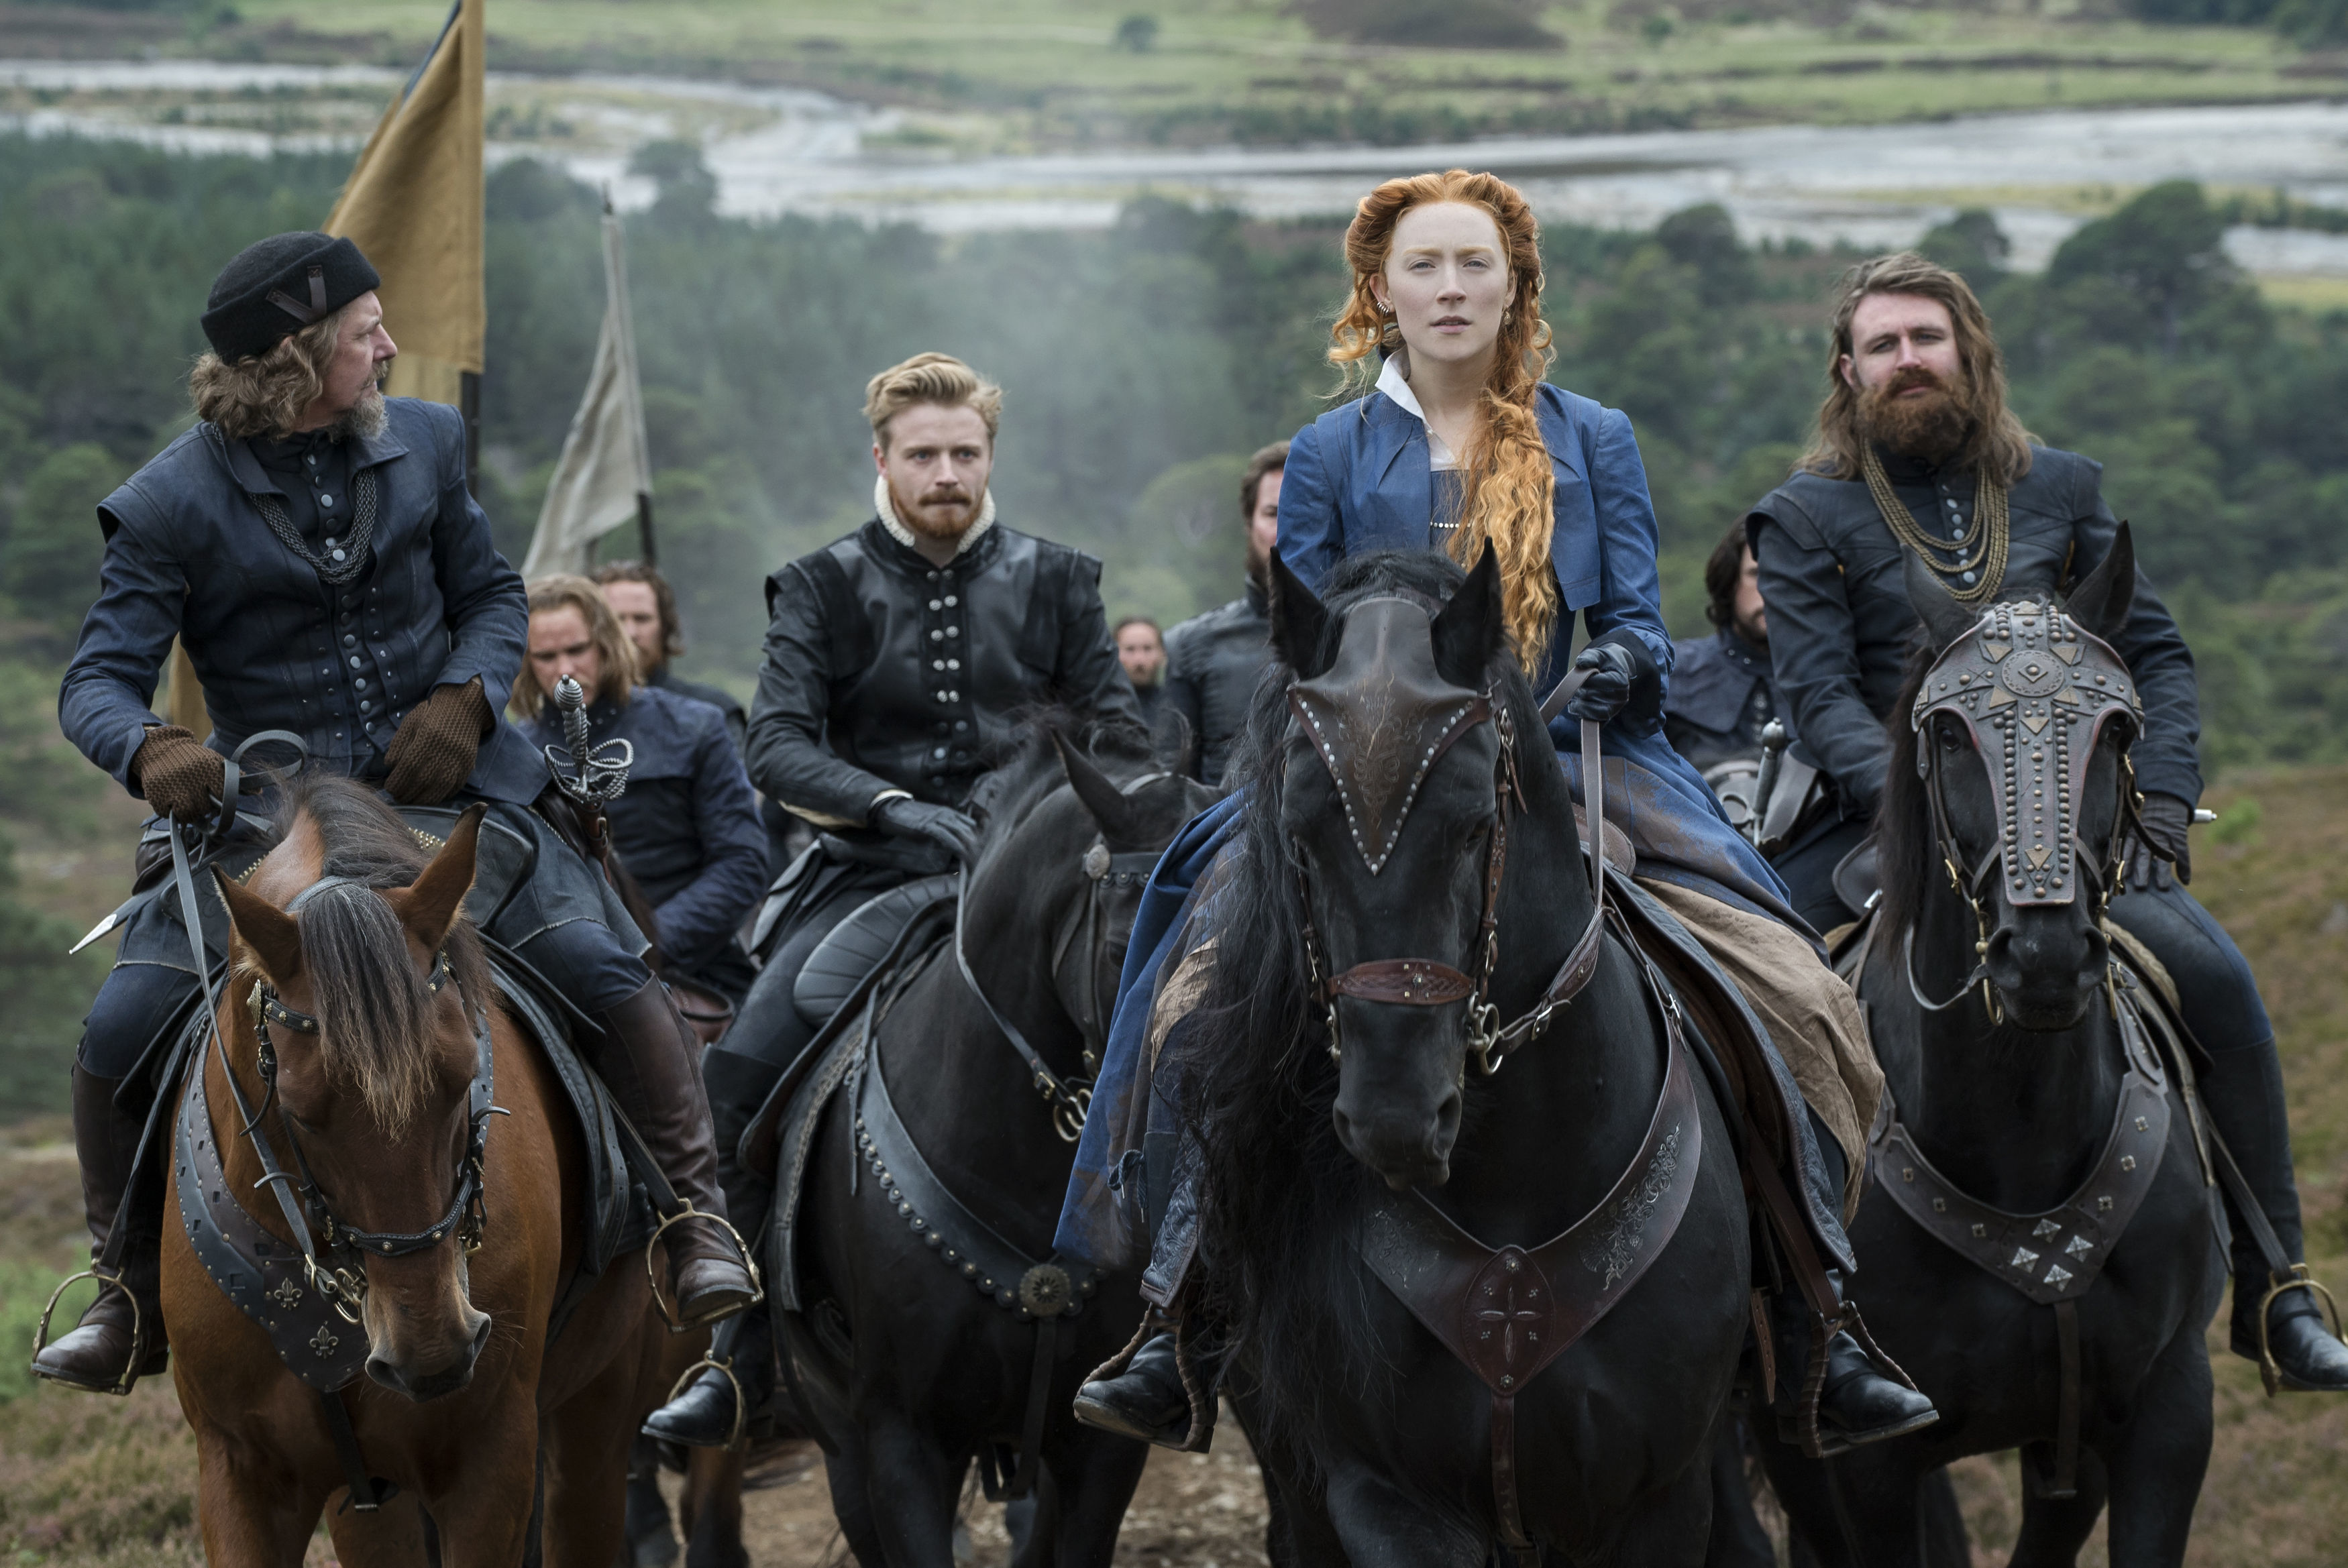 Ian Hart as Lord Maitland, Jack Lowden as Lord Darnley, Saoirse Ronan as Mary Stuart and James McArdle as Earl of Moray in Mary, Queen of Scots.